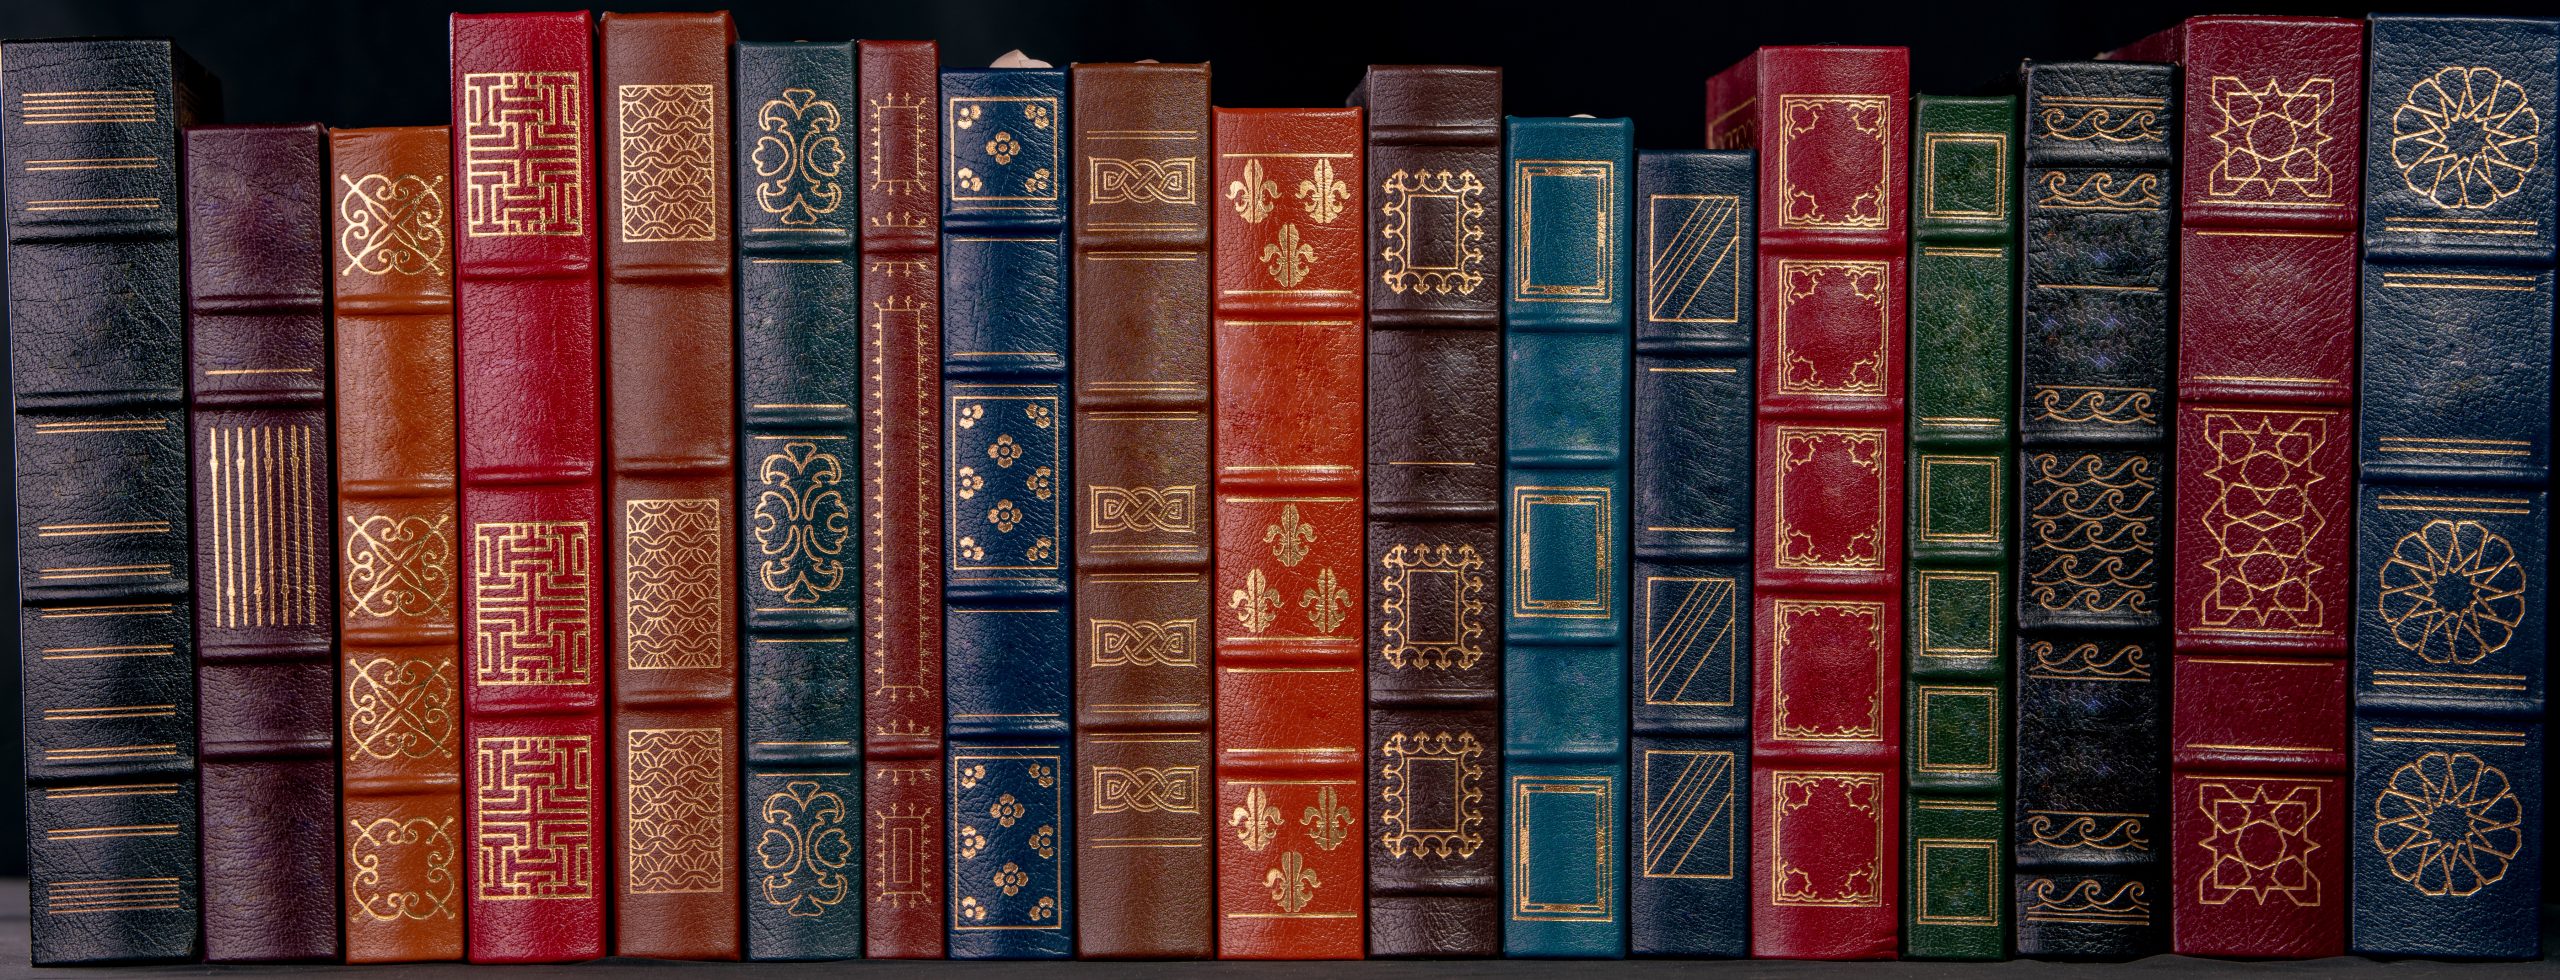 A stack of beautiful leather bound books with golden decoration